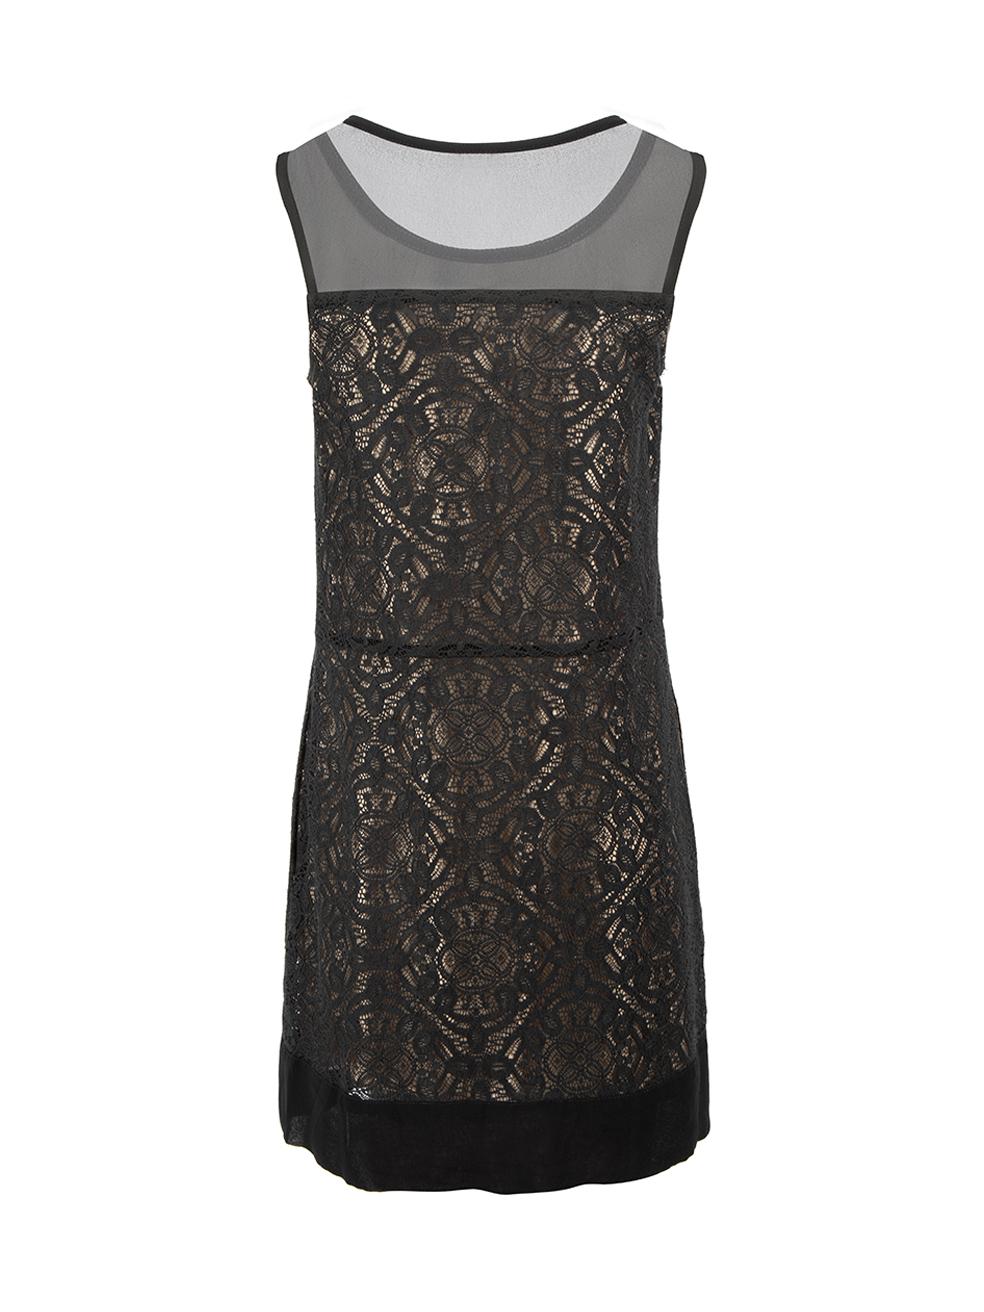 Marc by Marc Jacobs Black Lace Mini Dress Size XS In Good Condition For Sale In London, GB